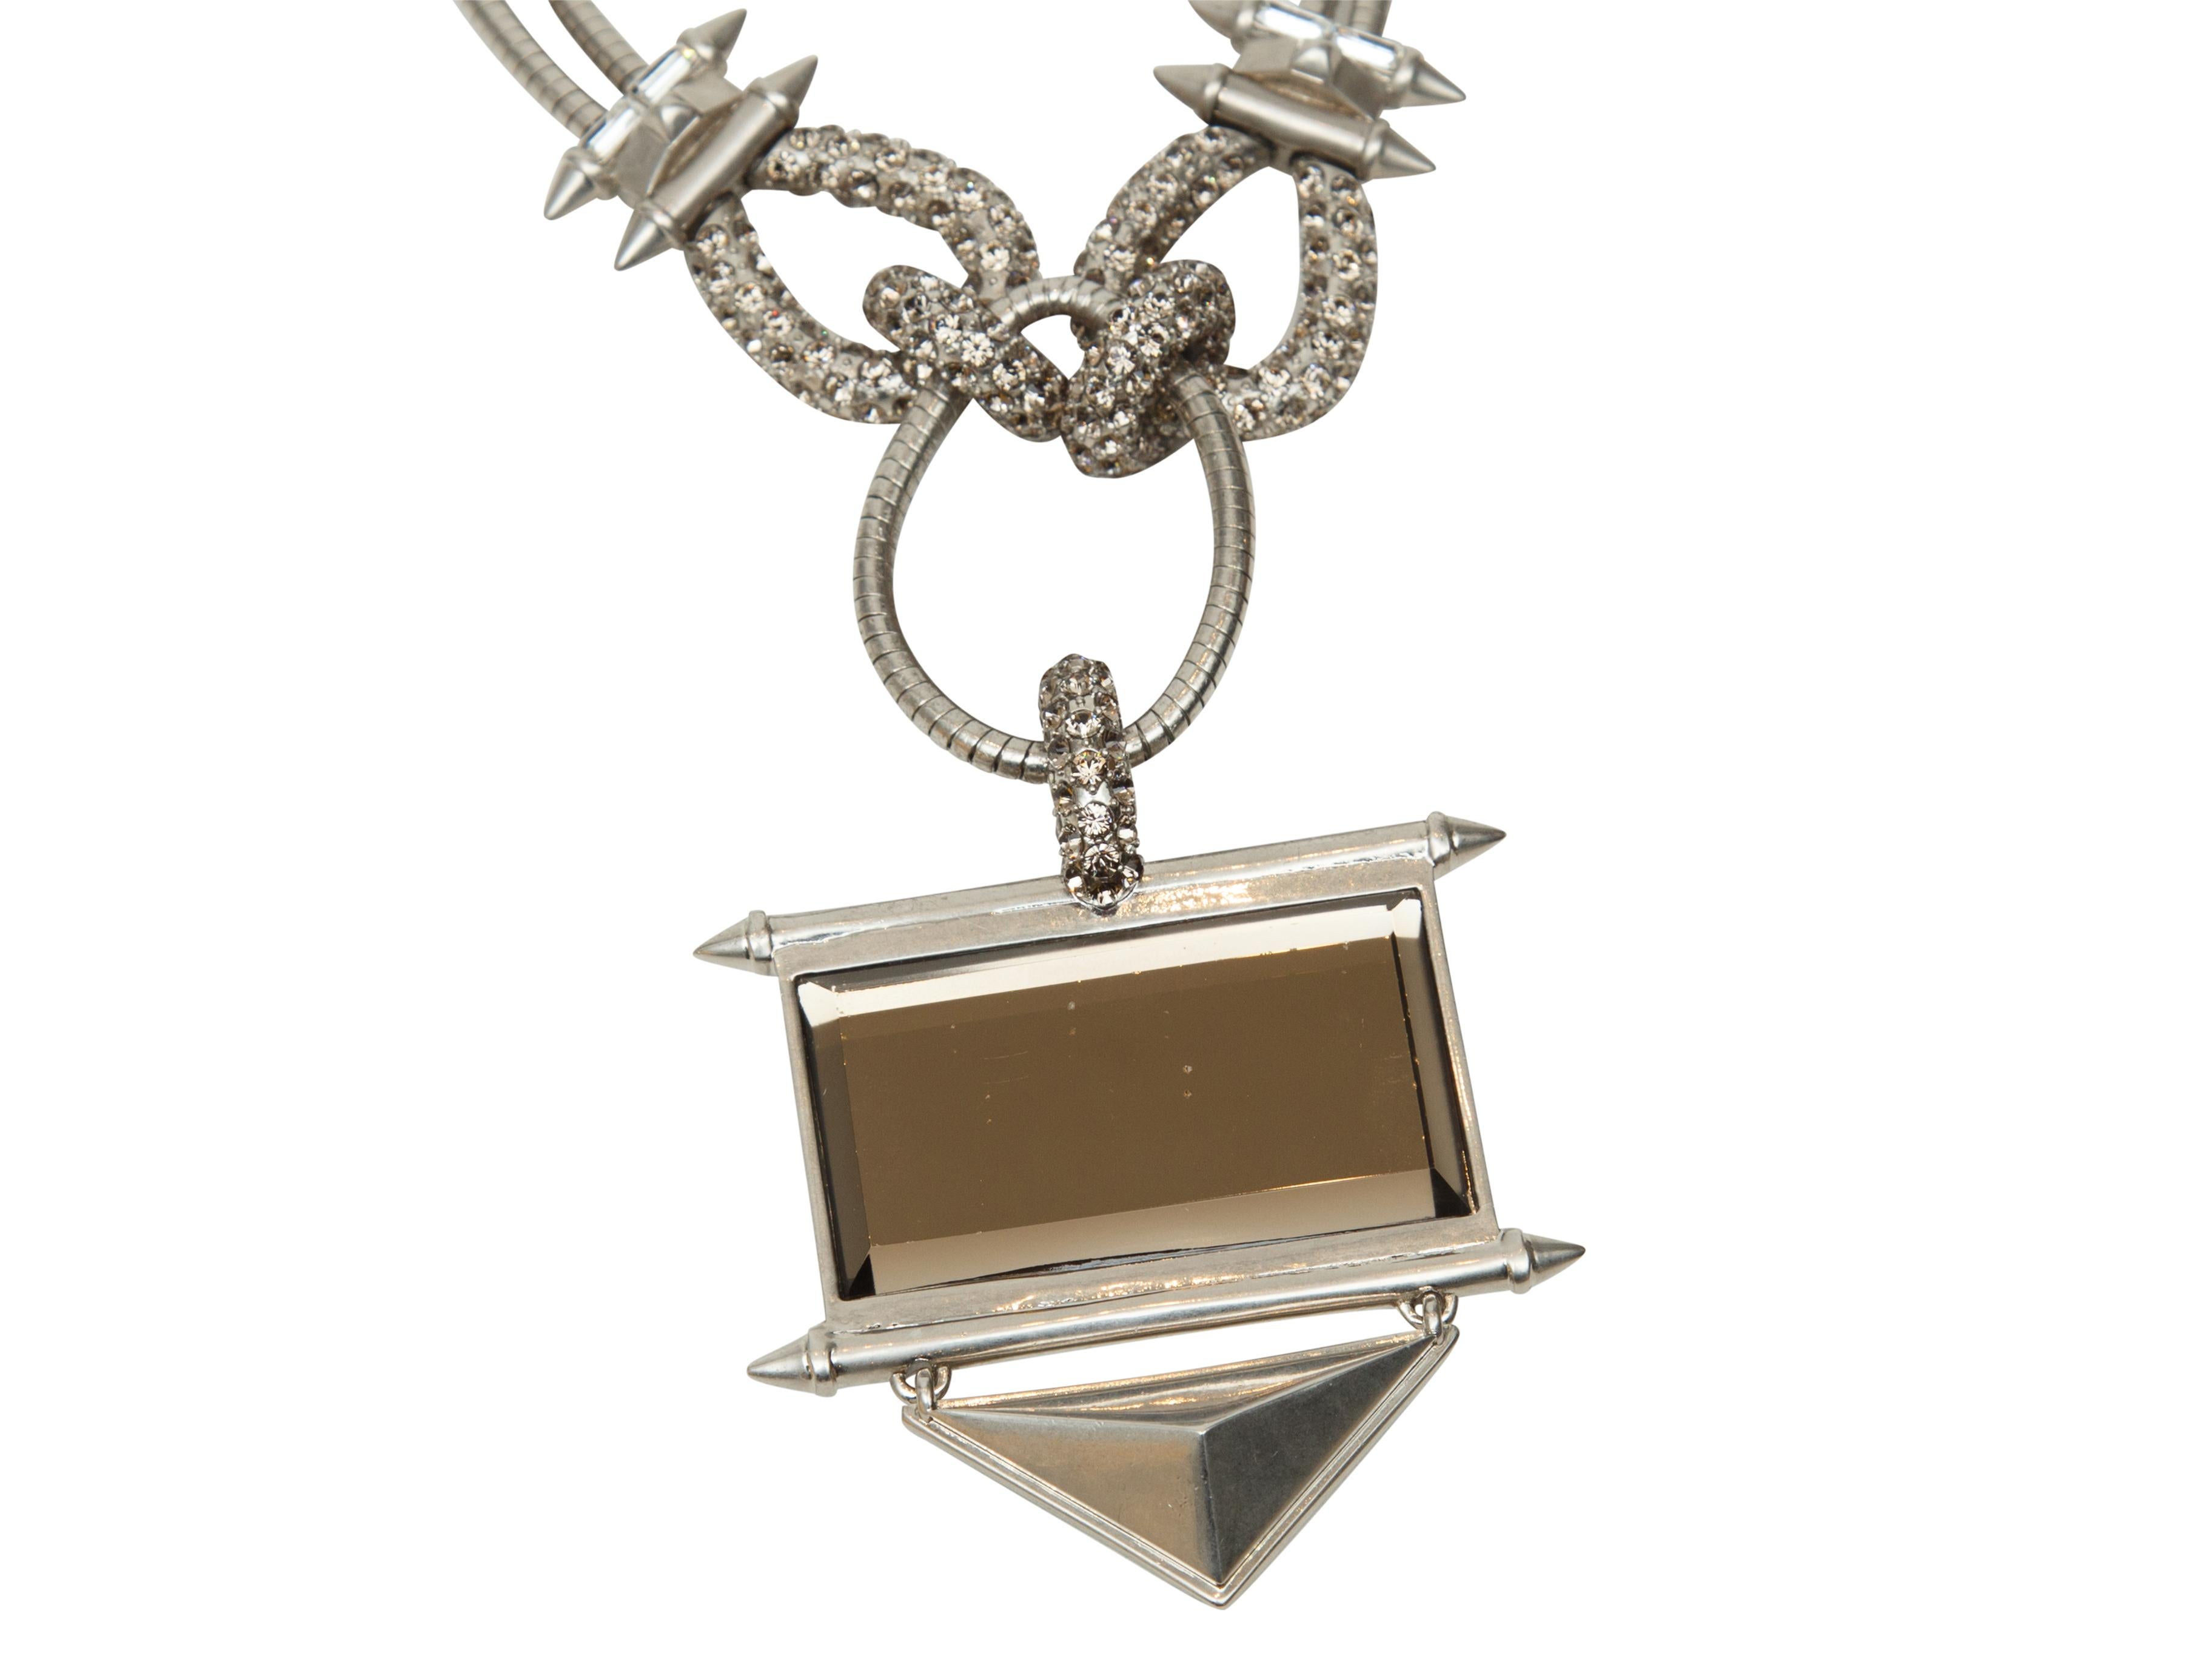 Product details: Silver-tone short mirror pendant necklace by Alexander McQueen. Diamond-embellishments throughout. 14